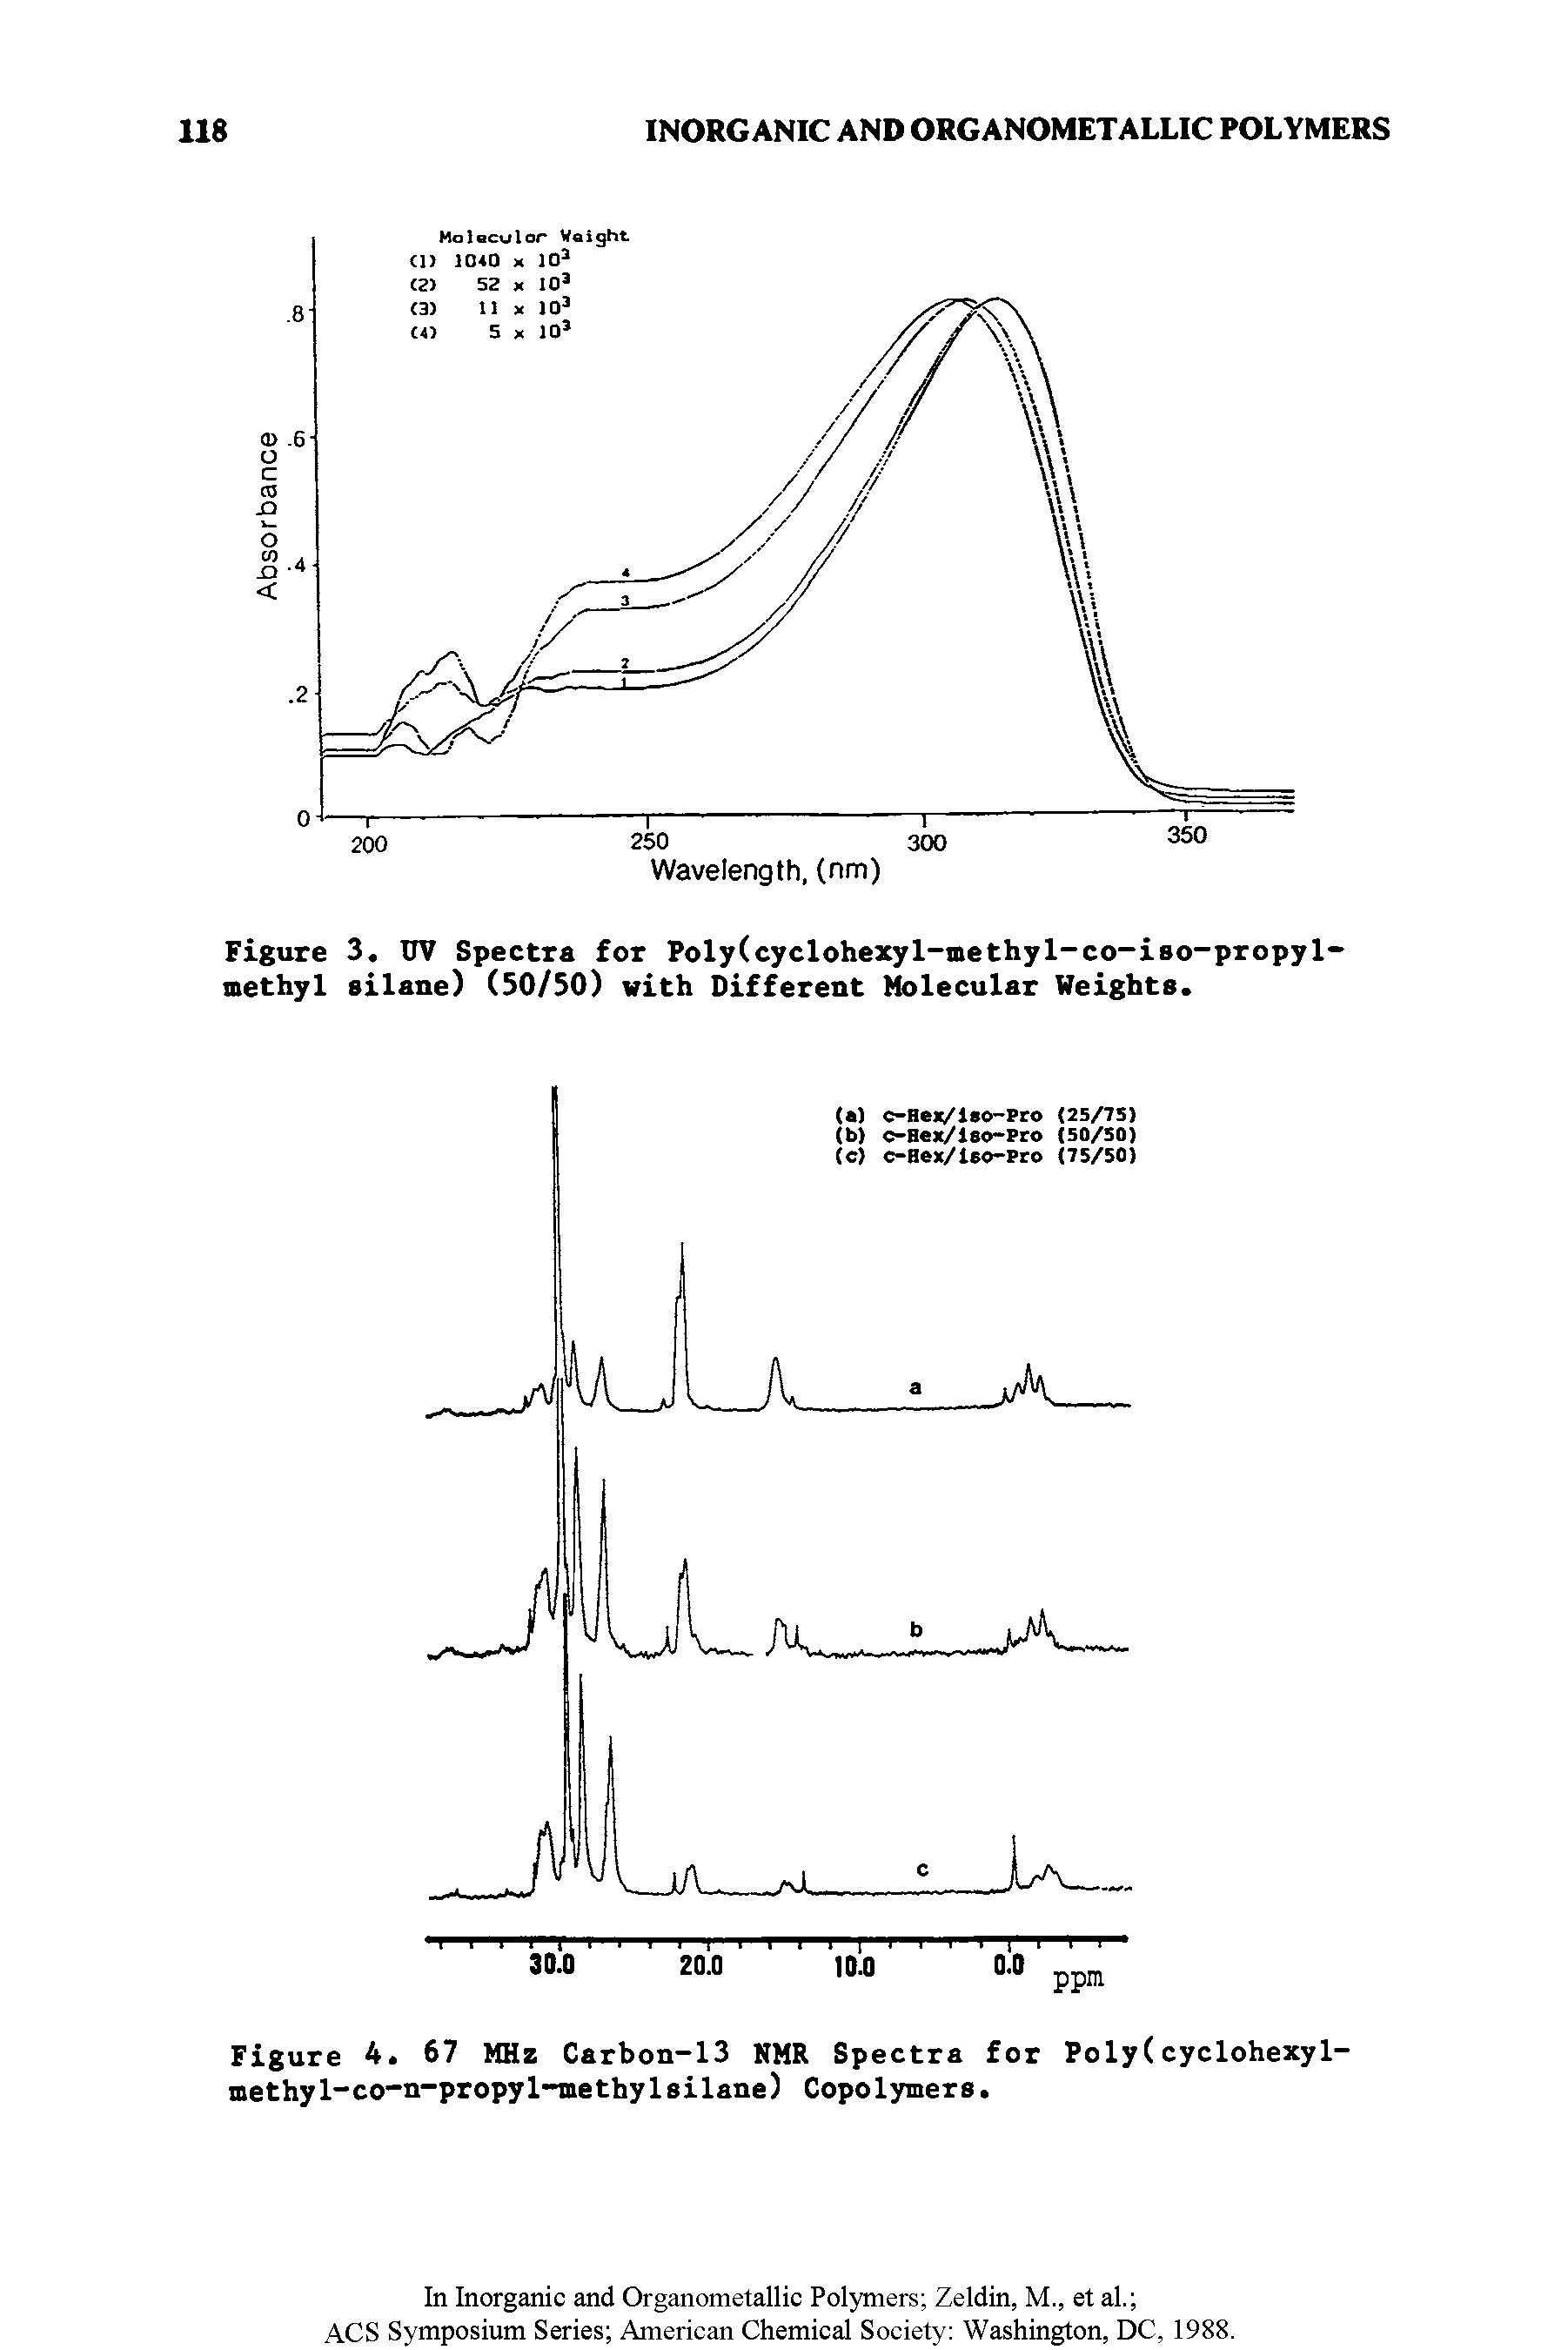 Figure 3. UV Spectra for Poly(cyclohexyl-methy 1-co-iso-propyl-methyl silane) (50/50) with Different Molecular Heights.